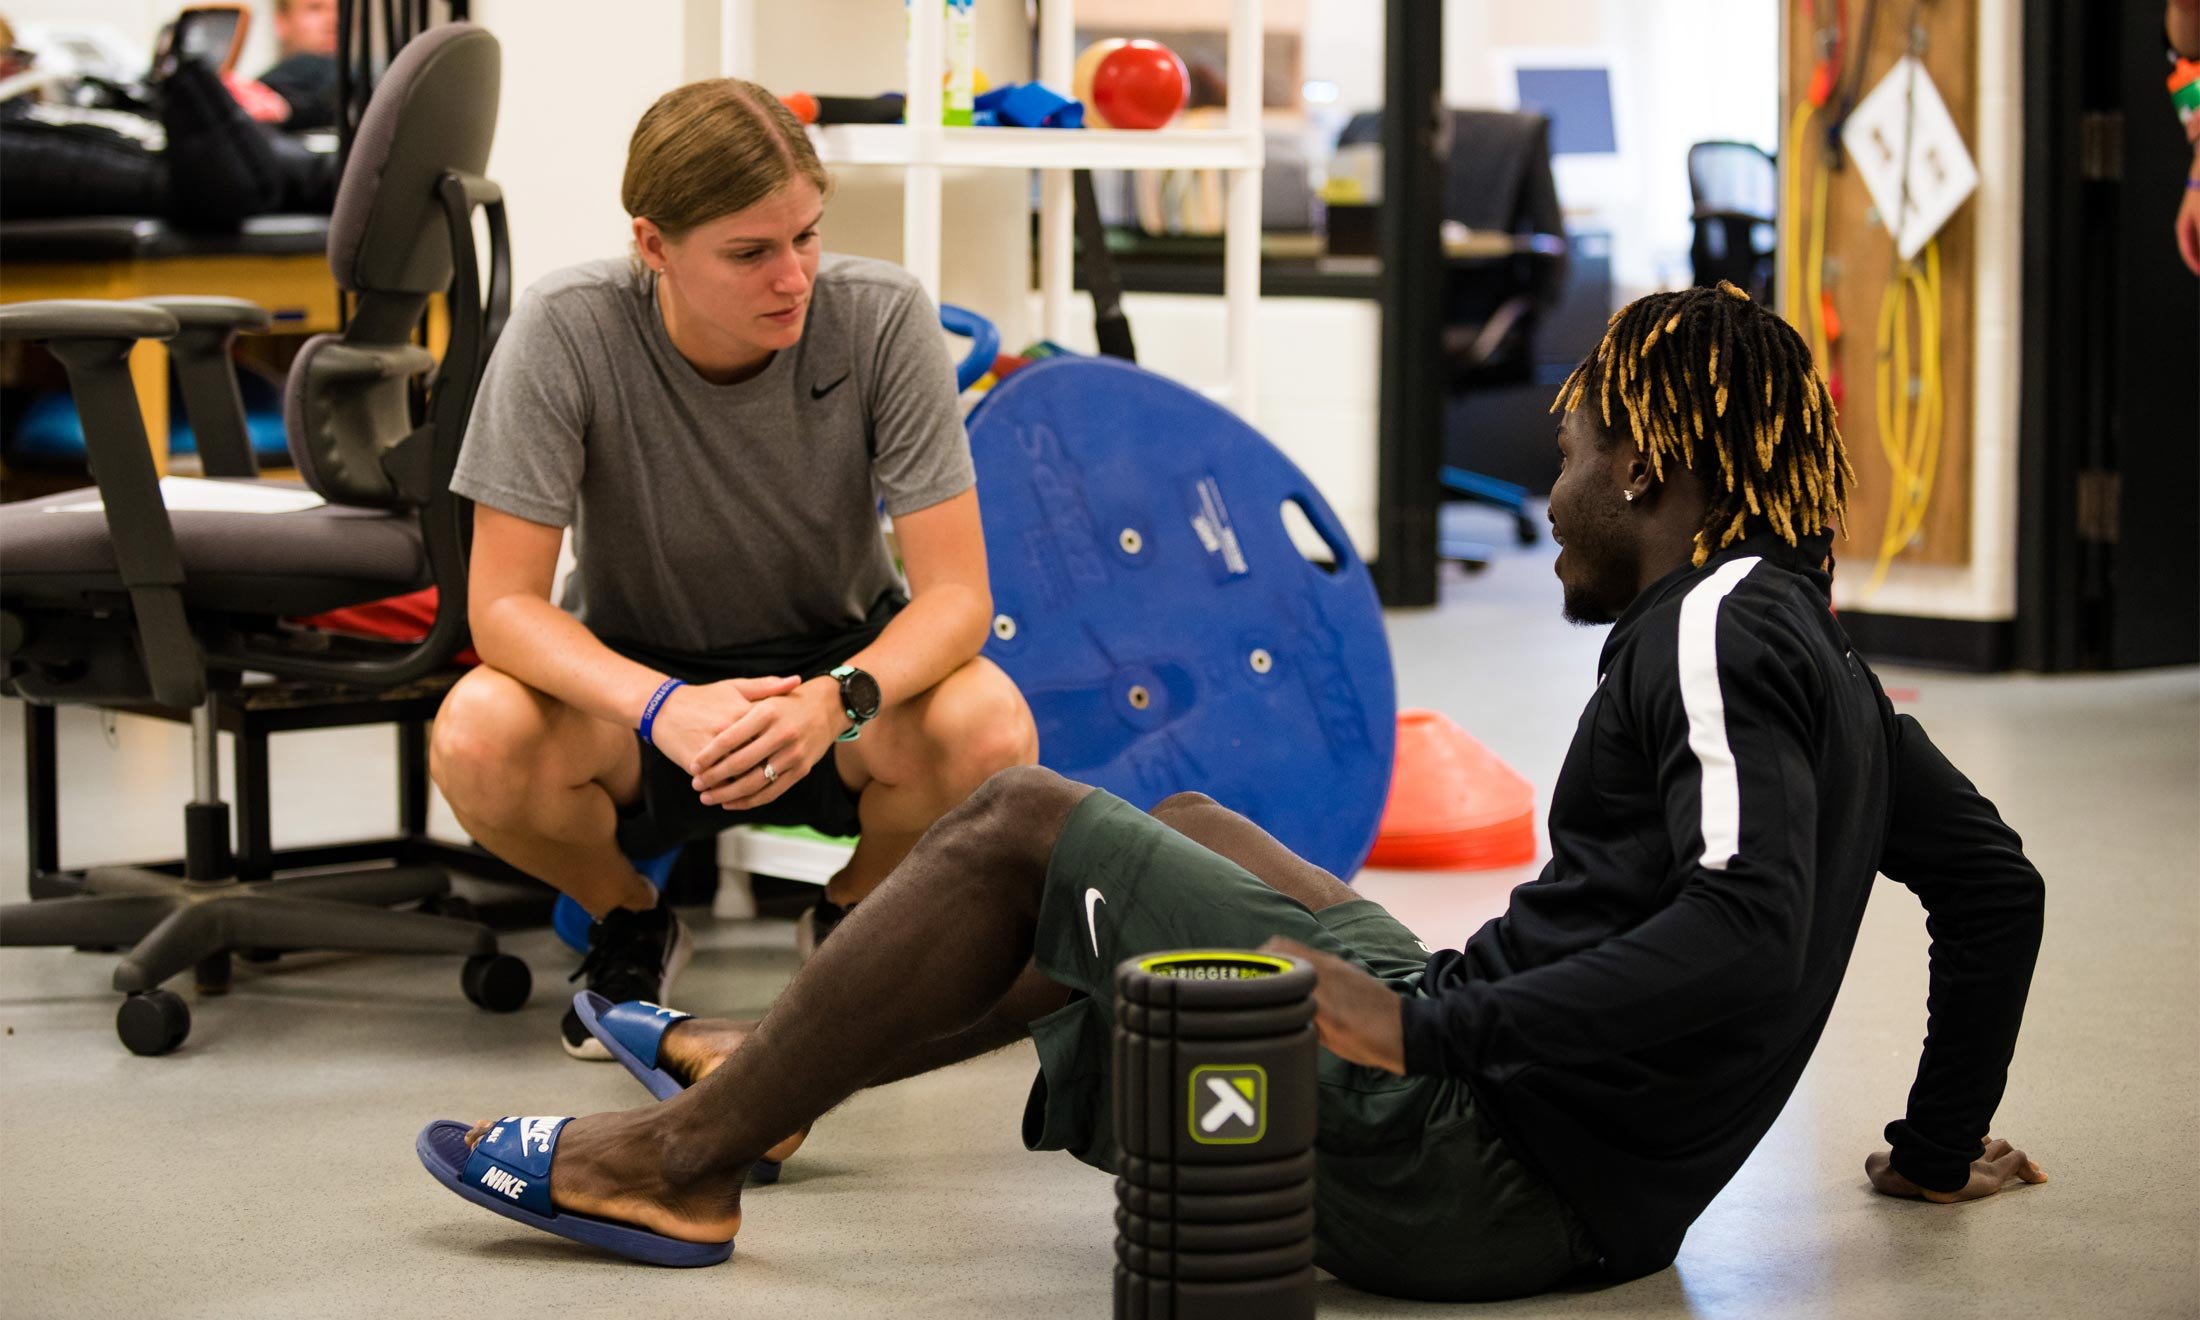 Oakland University soccer player Wilfred Williams sits on the floor to stretch while talking to an athletic trainer